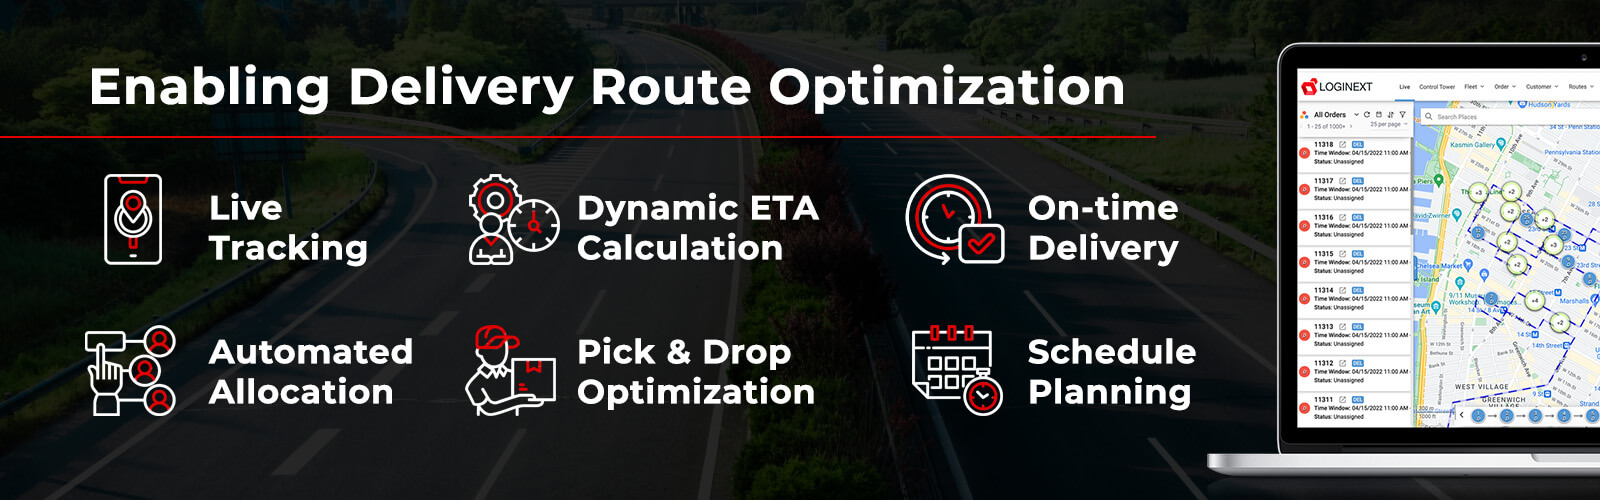 How does LogiNext Enable Delivery Route Optimization